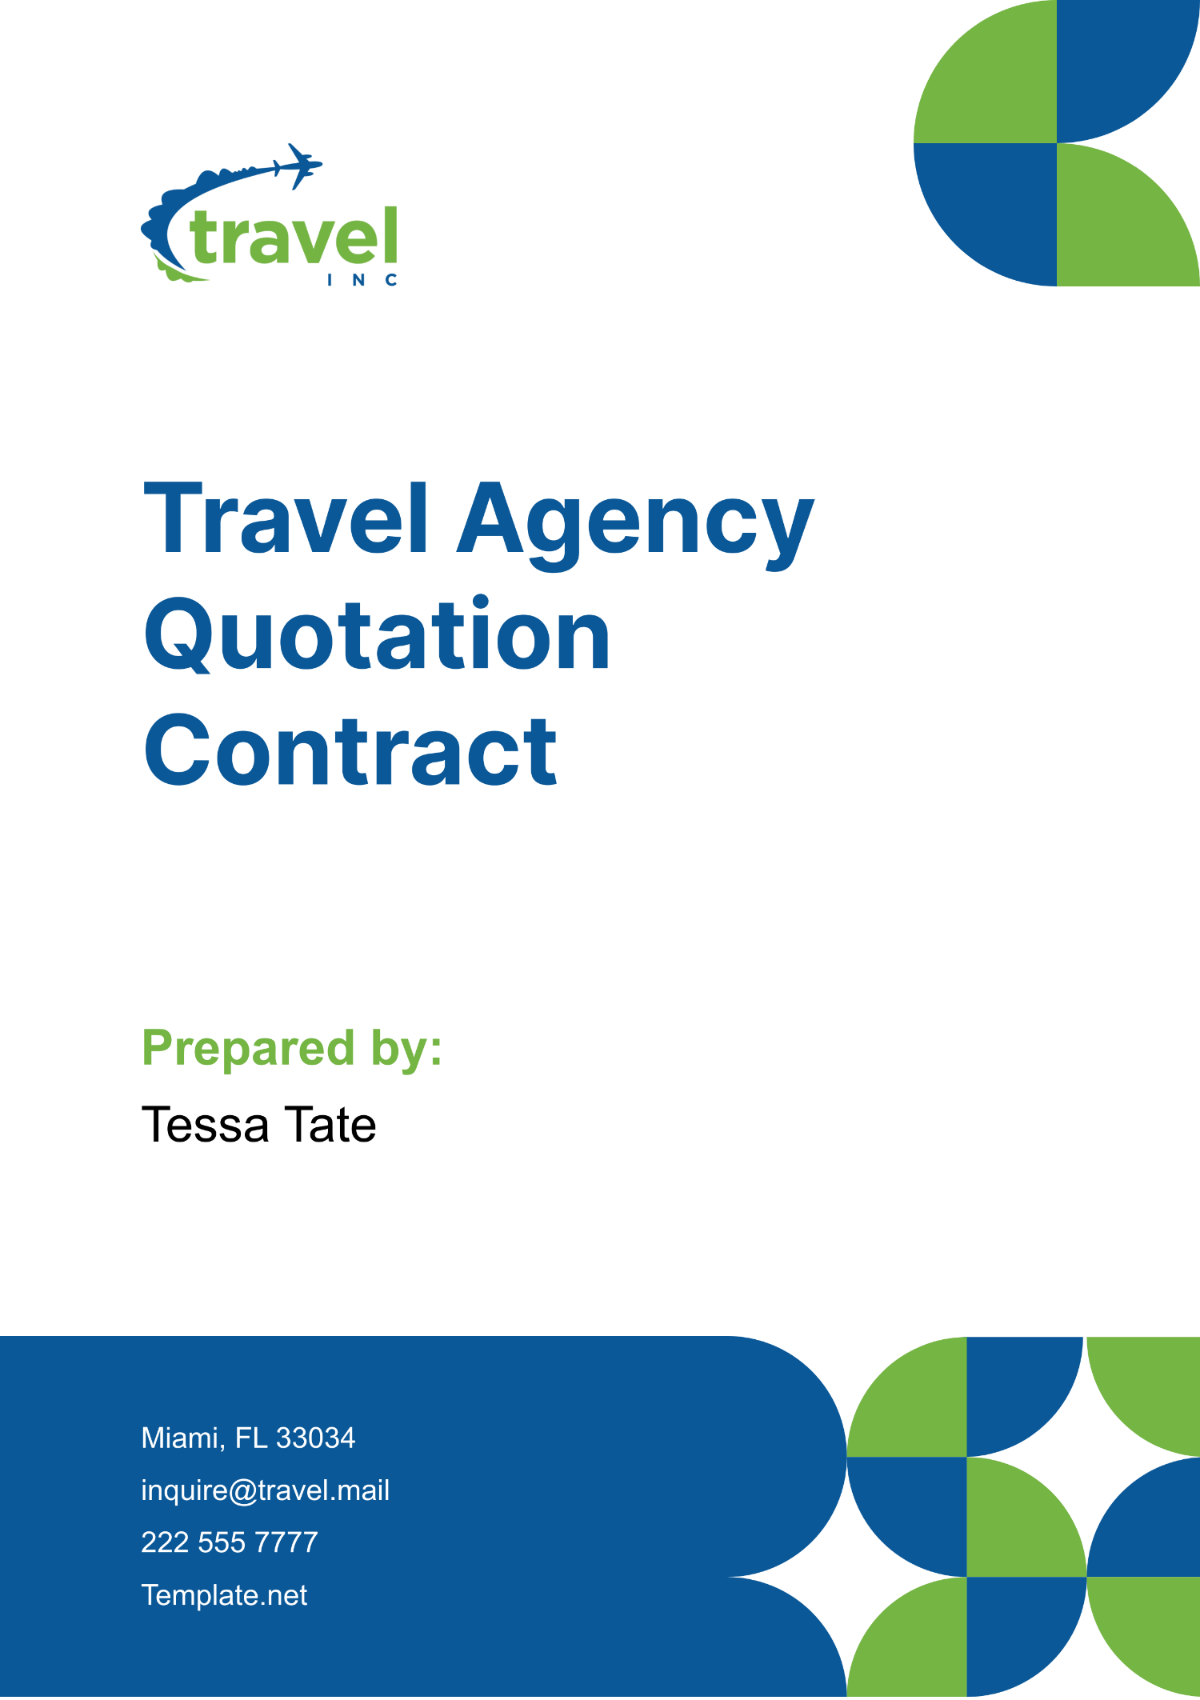 Travel Agency Quotation Contract Template